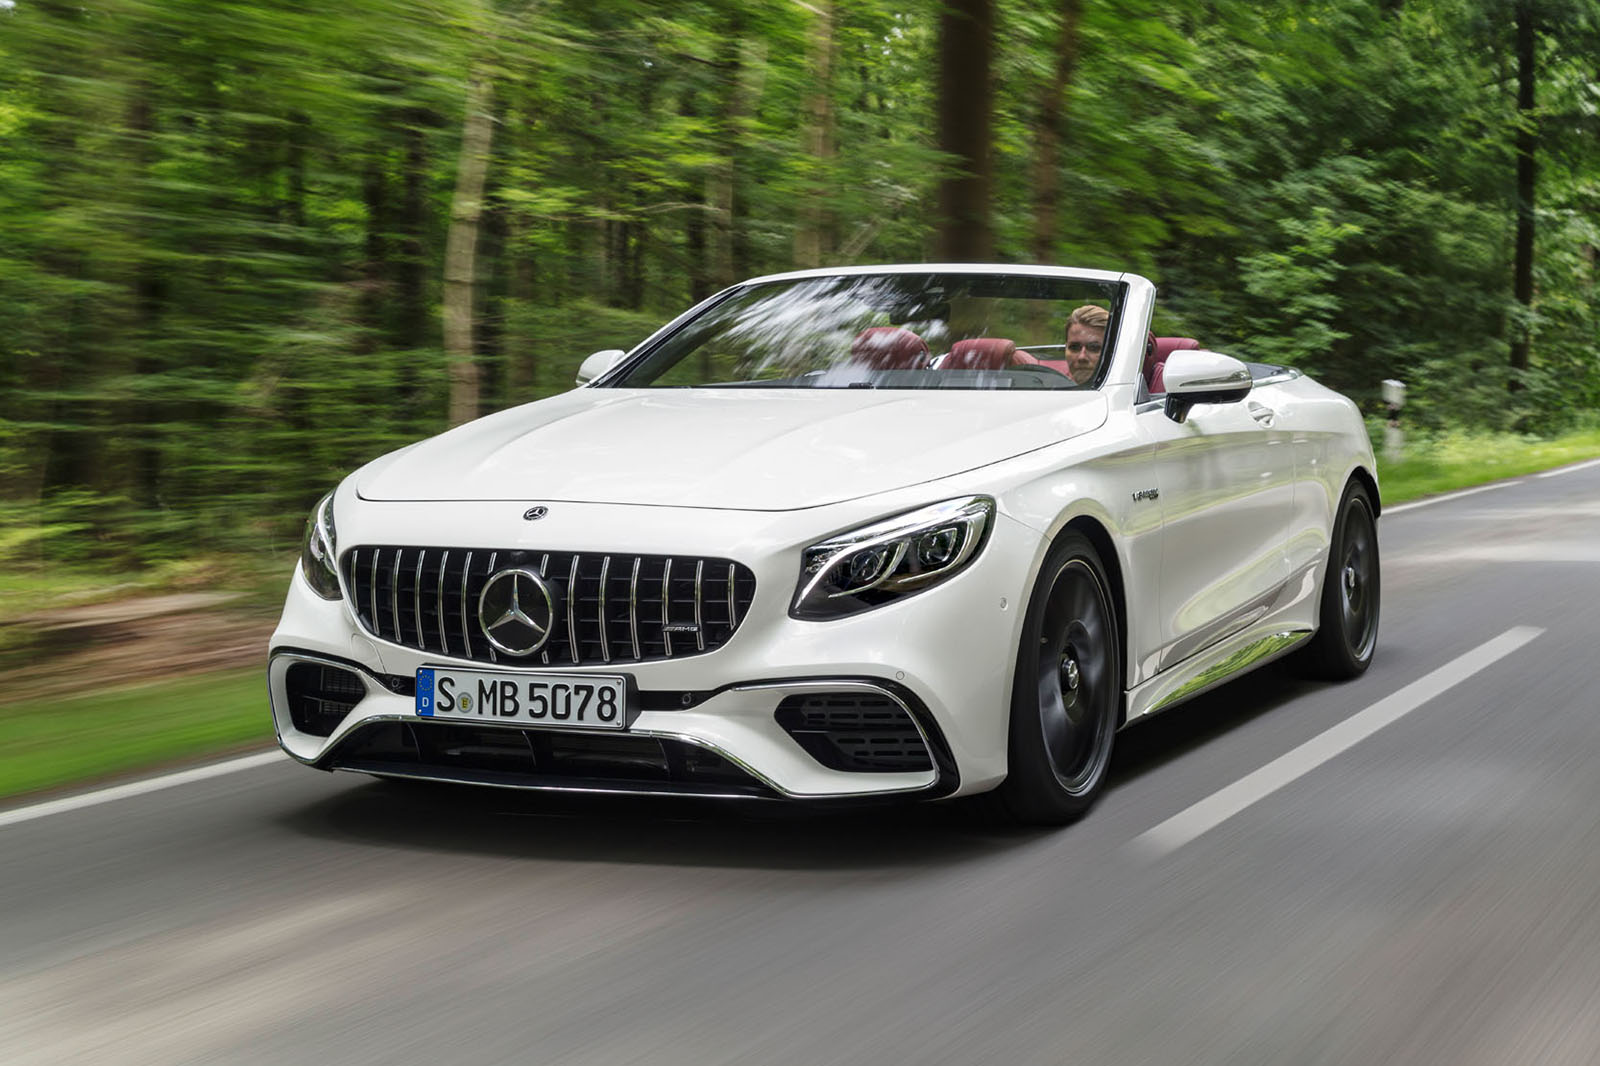 New Mercedes Benz S Class Coupe Prices For Db11 Rival Confirmed Autocar